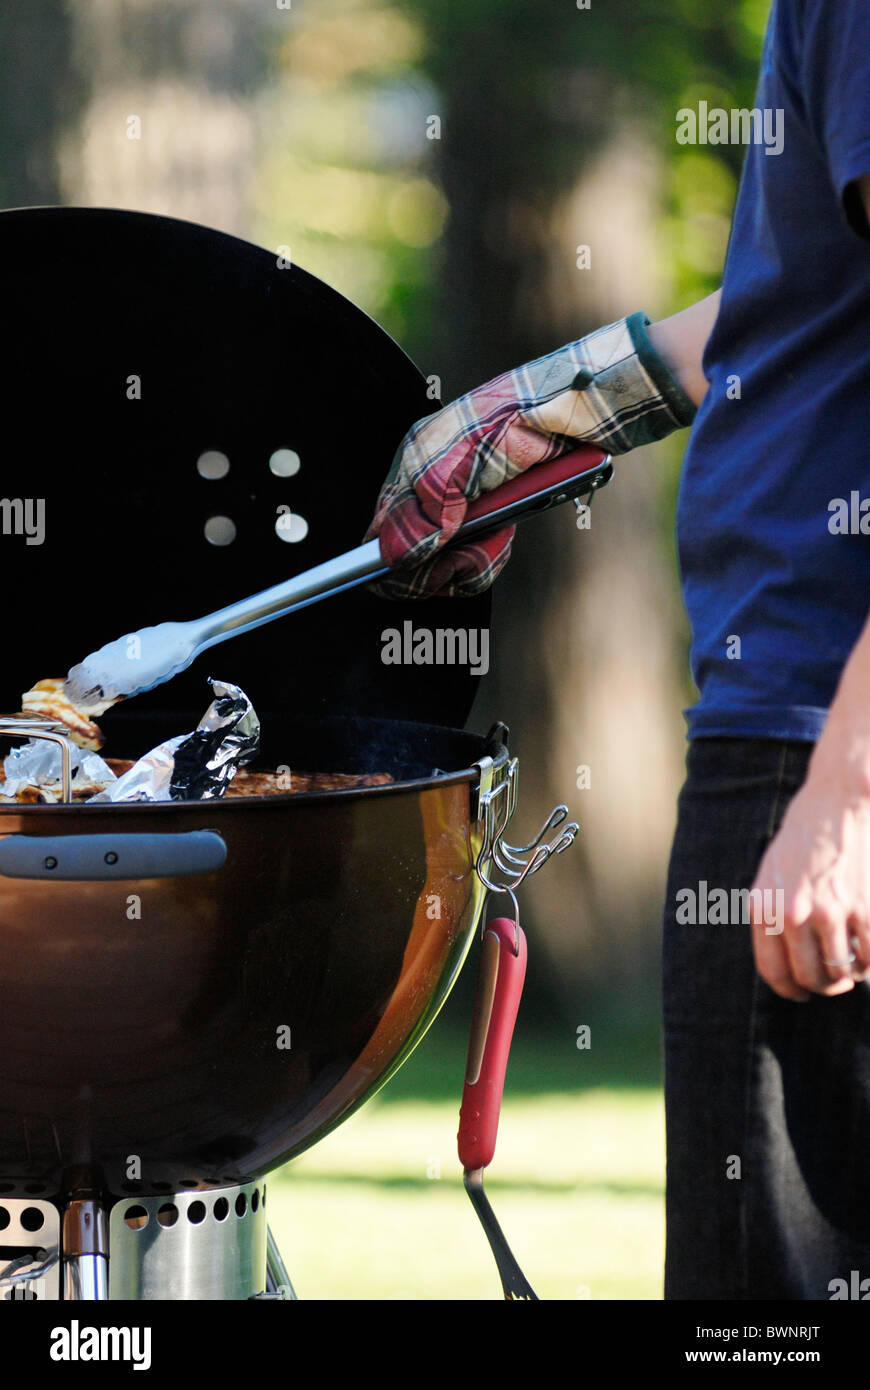 Barbeque grilling Stock Photo